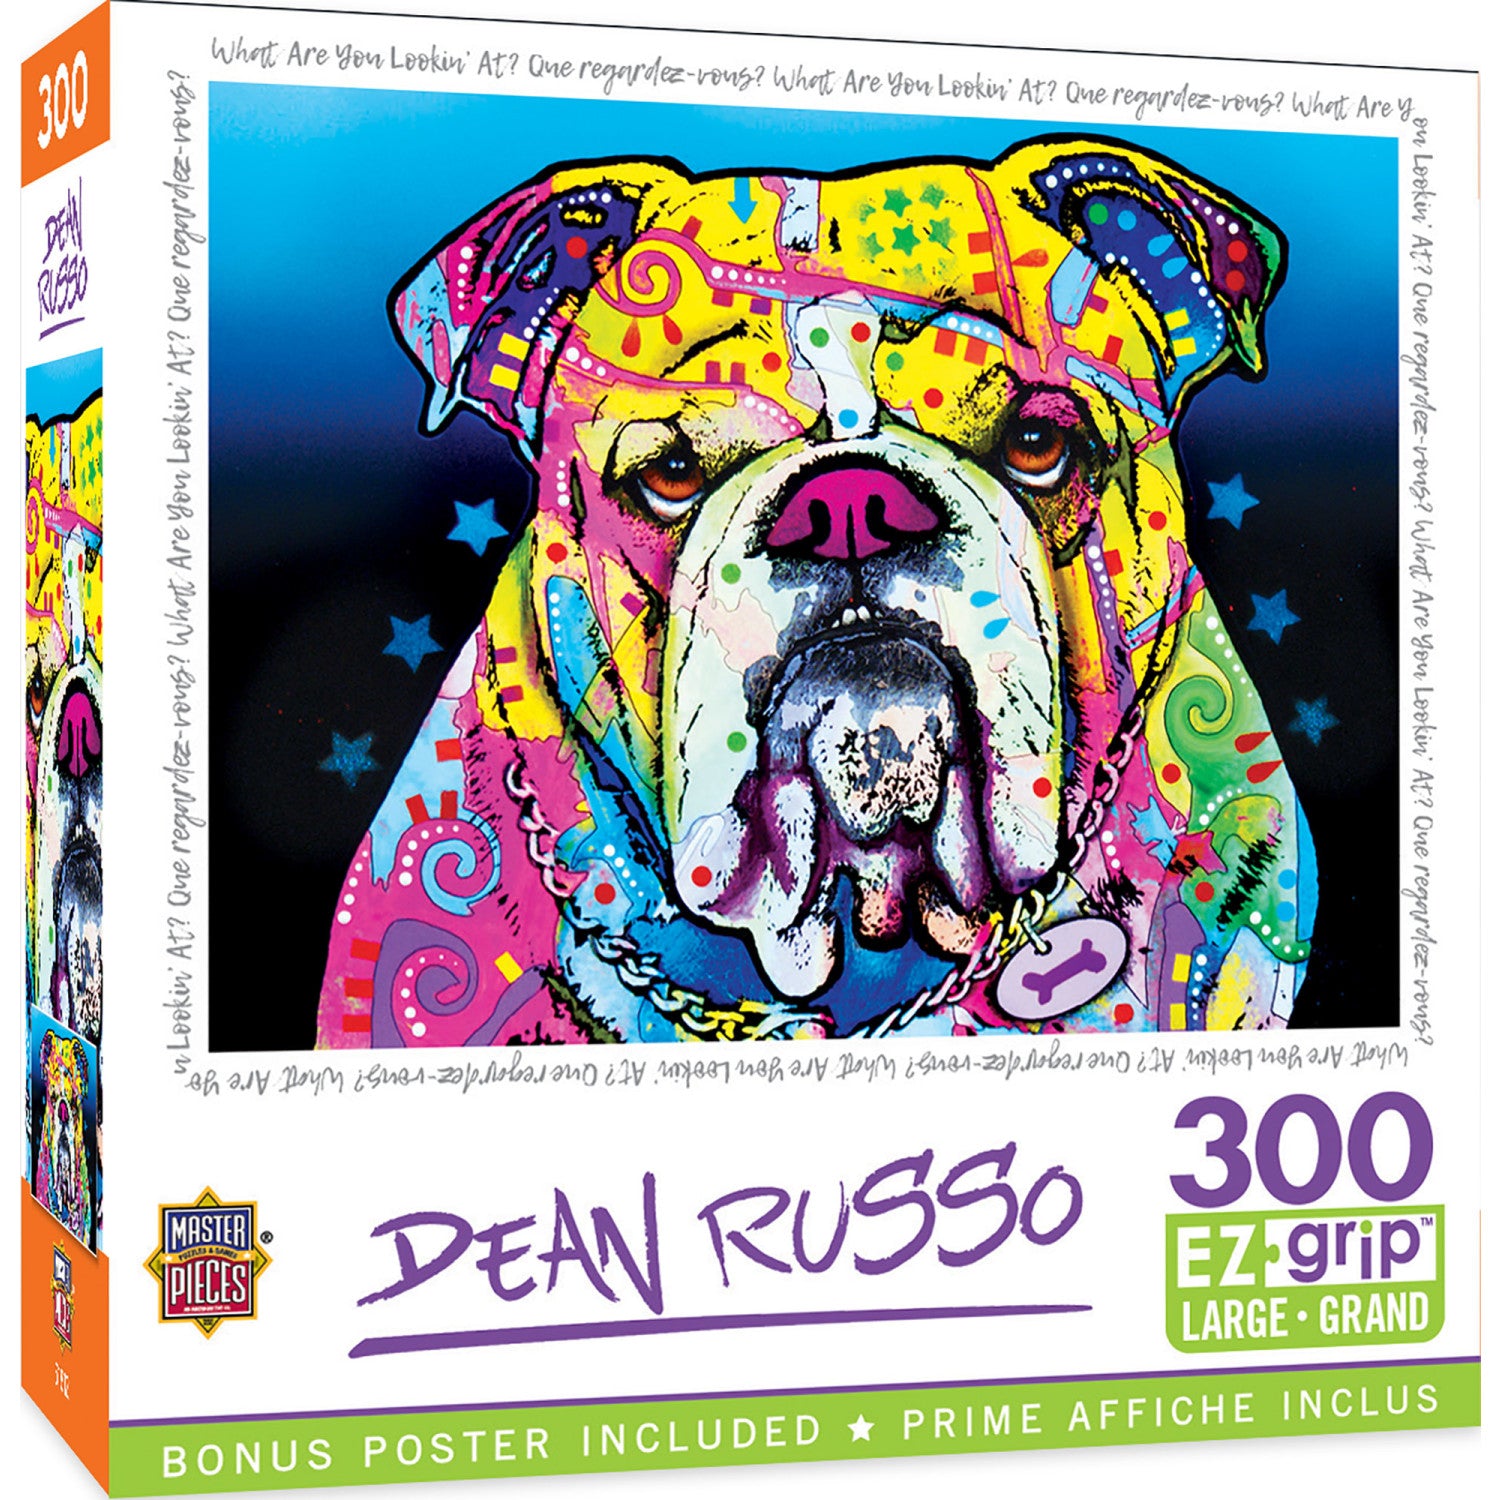 Dean Russo - What Are You Looking At? 300 Piece EZ Grip Jigsaw Puzzle